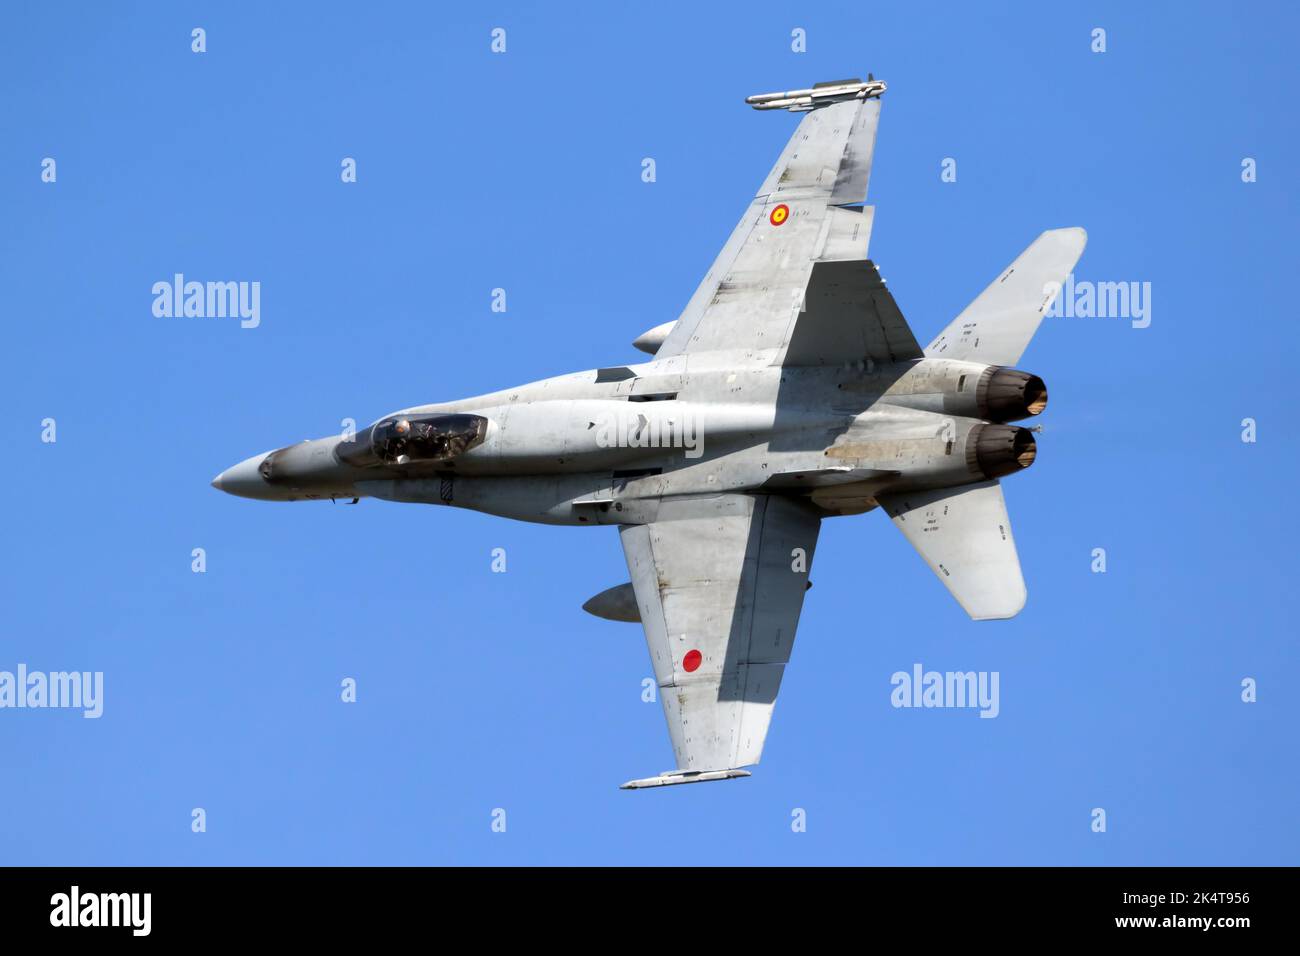 Spanish Air Force Boeing F/A-18 Hornet fighter jet plane in flight. The Netherlands - April 19, 2018 Stock Photo